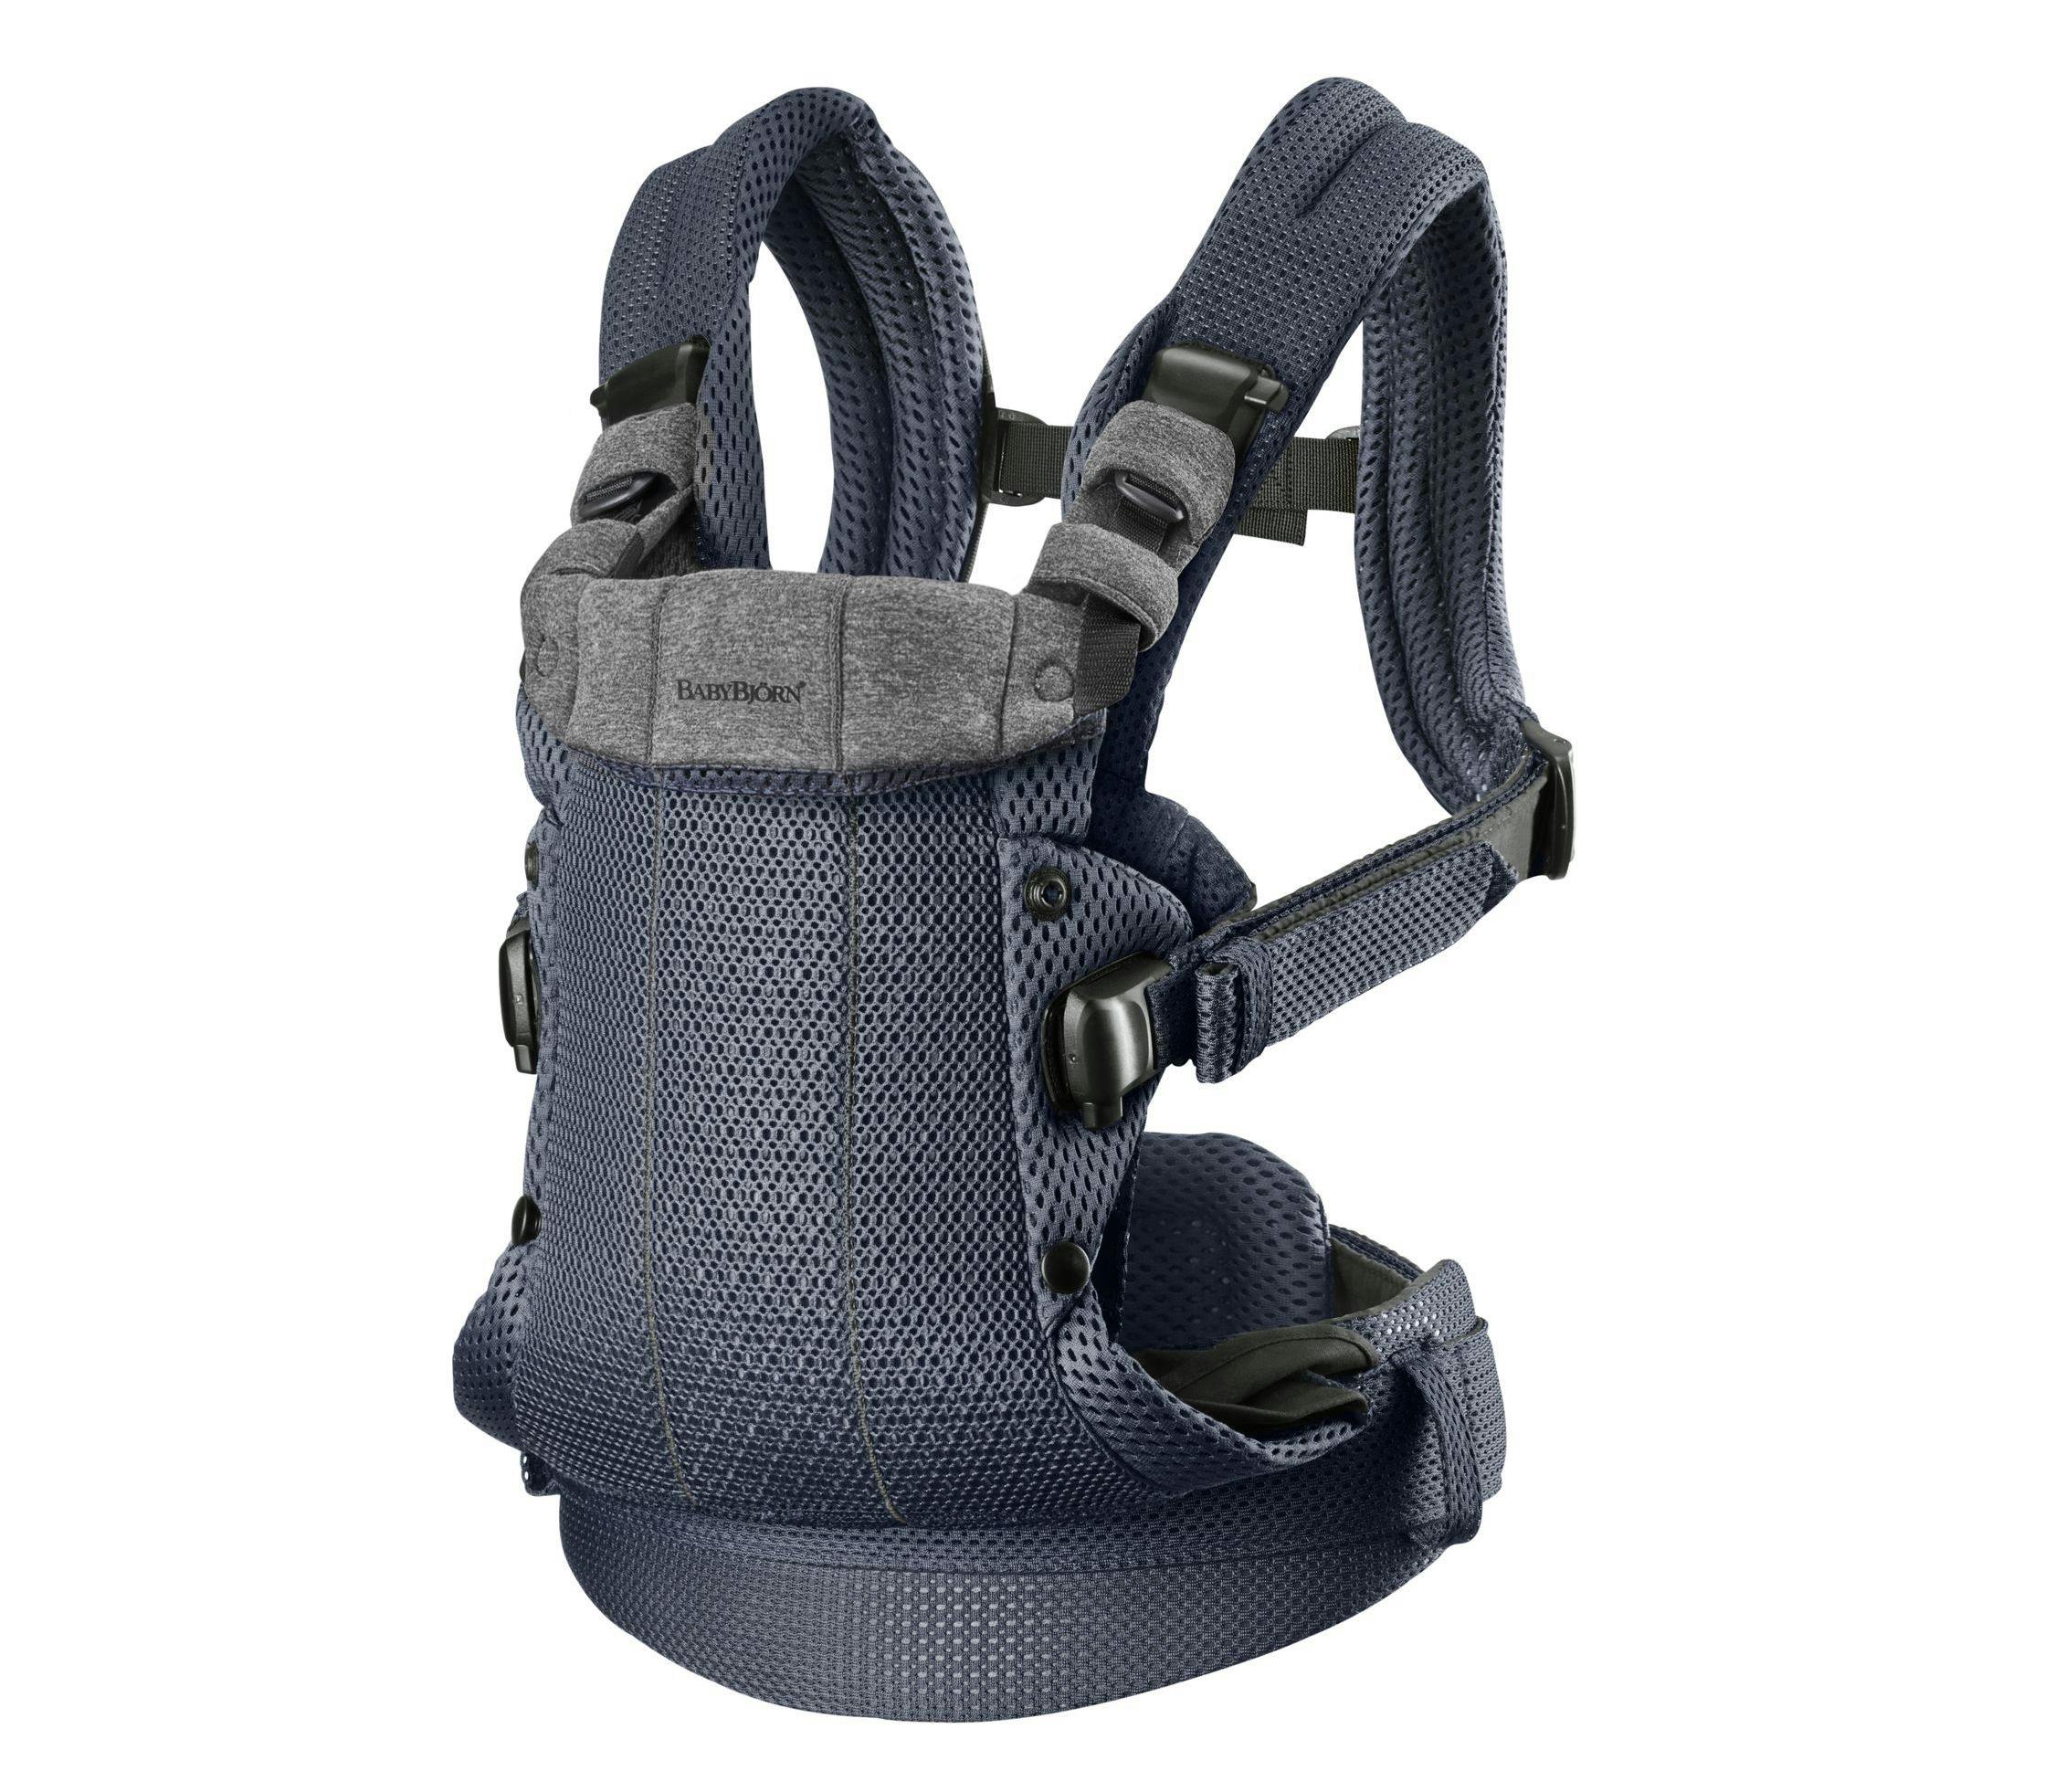 Product image of the Baby Carrier Harmony.